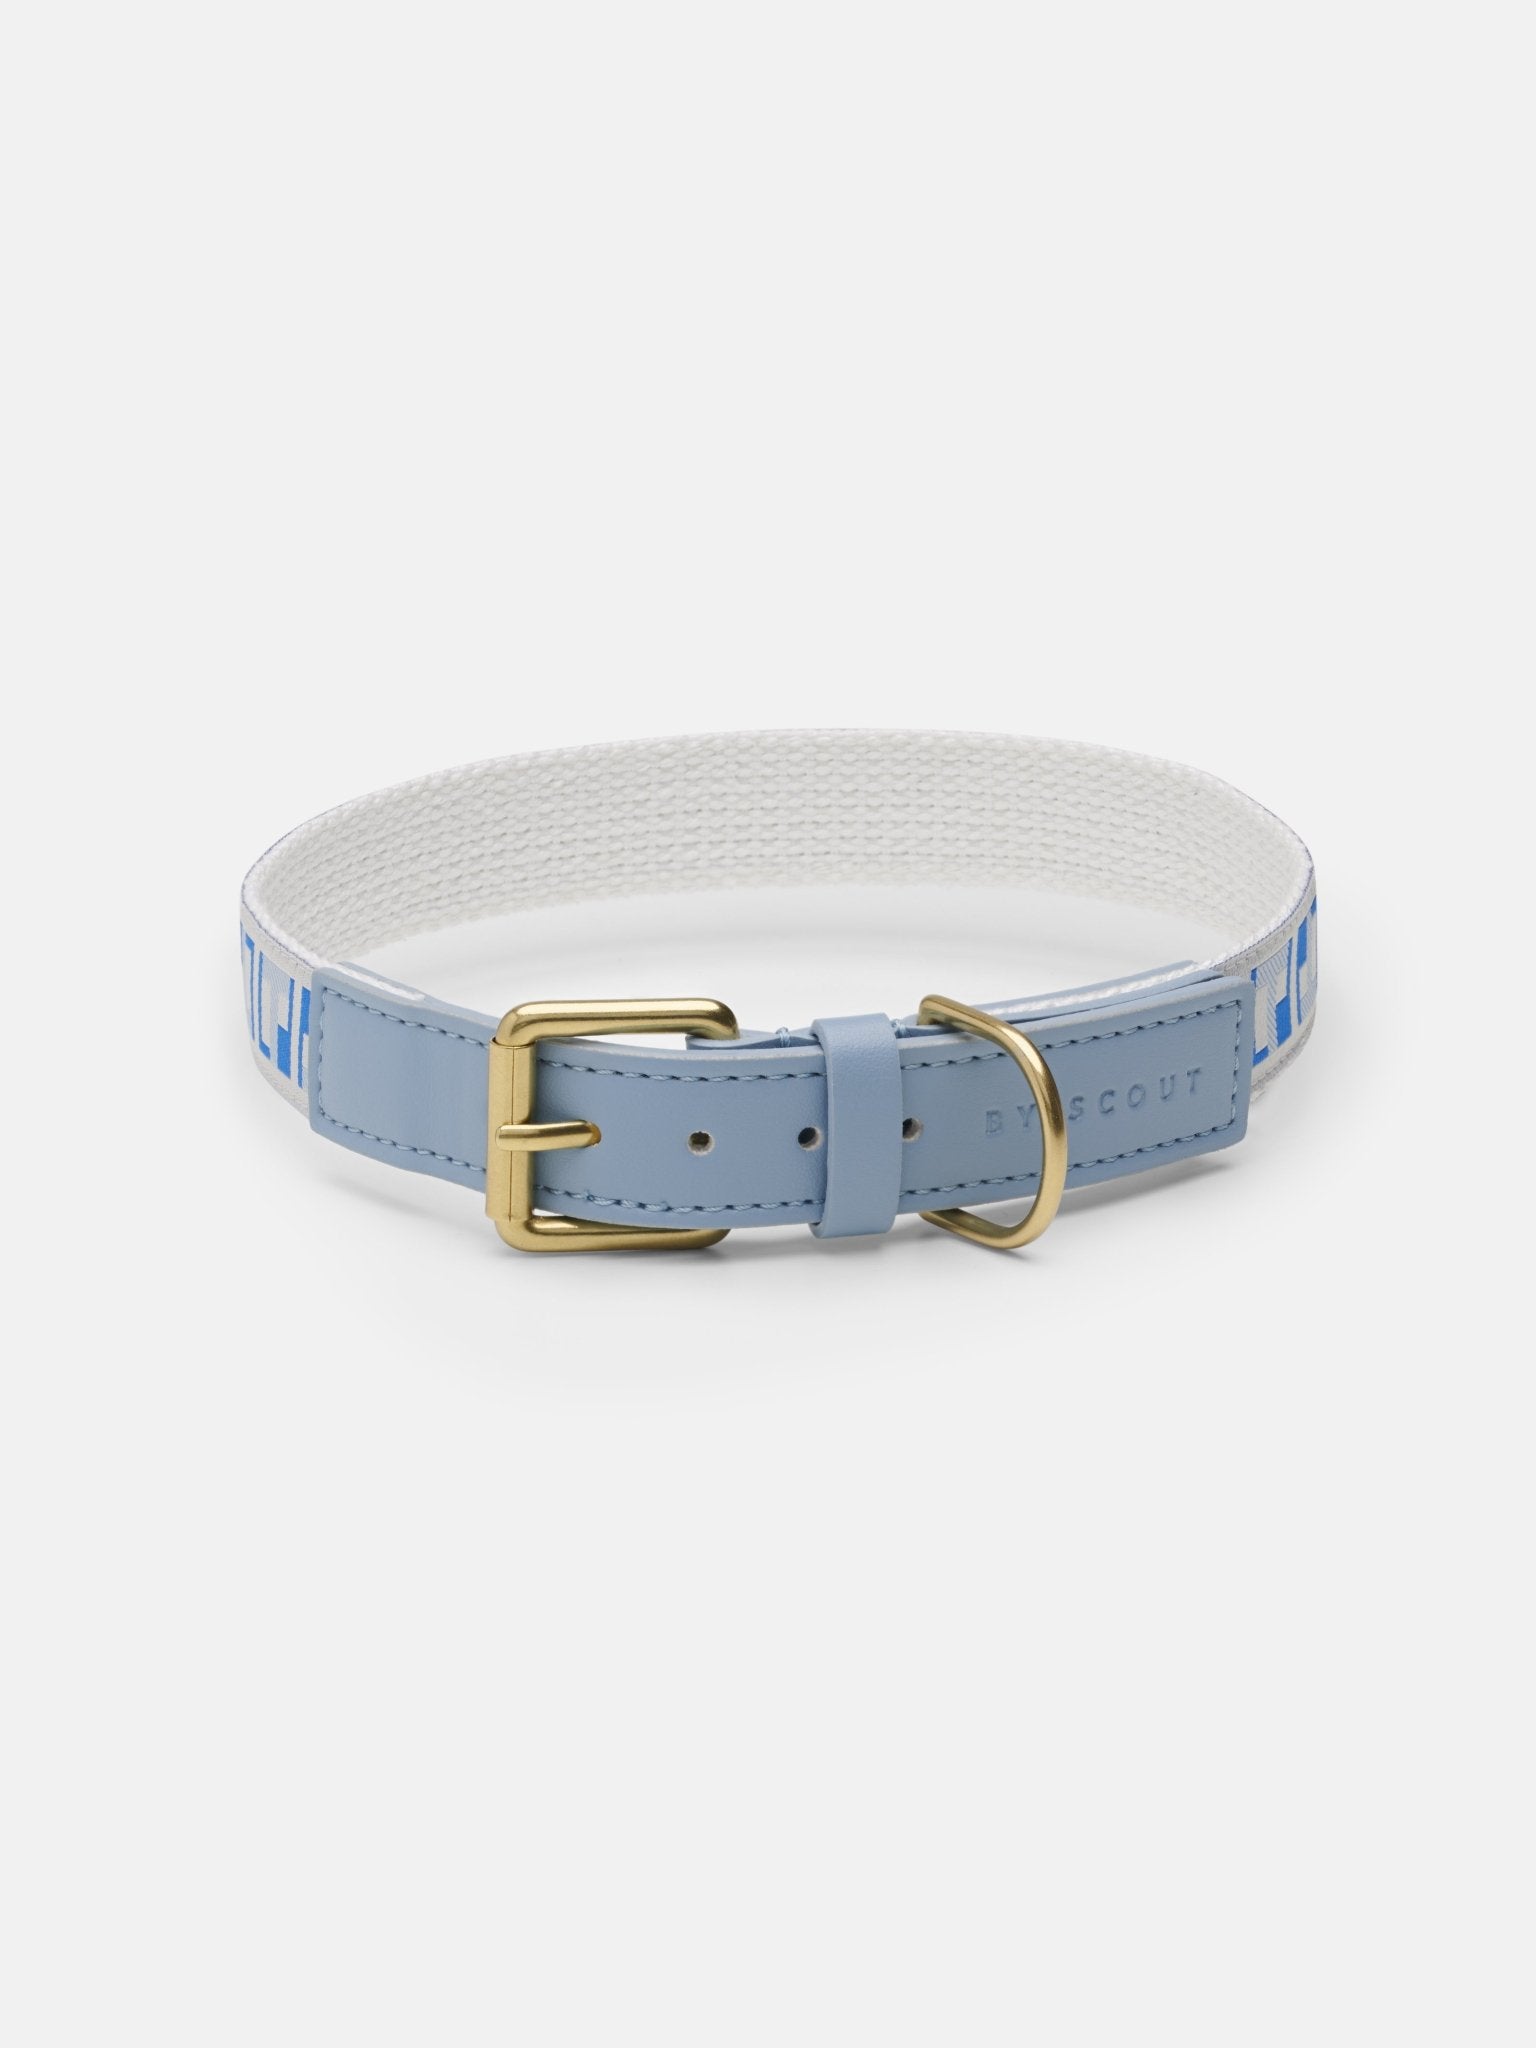 Trove Collar - Blues - By Scout